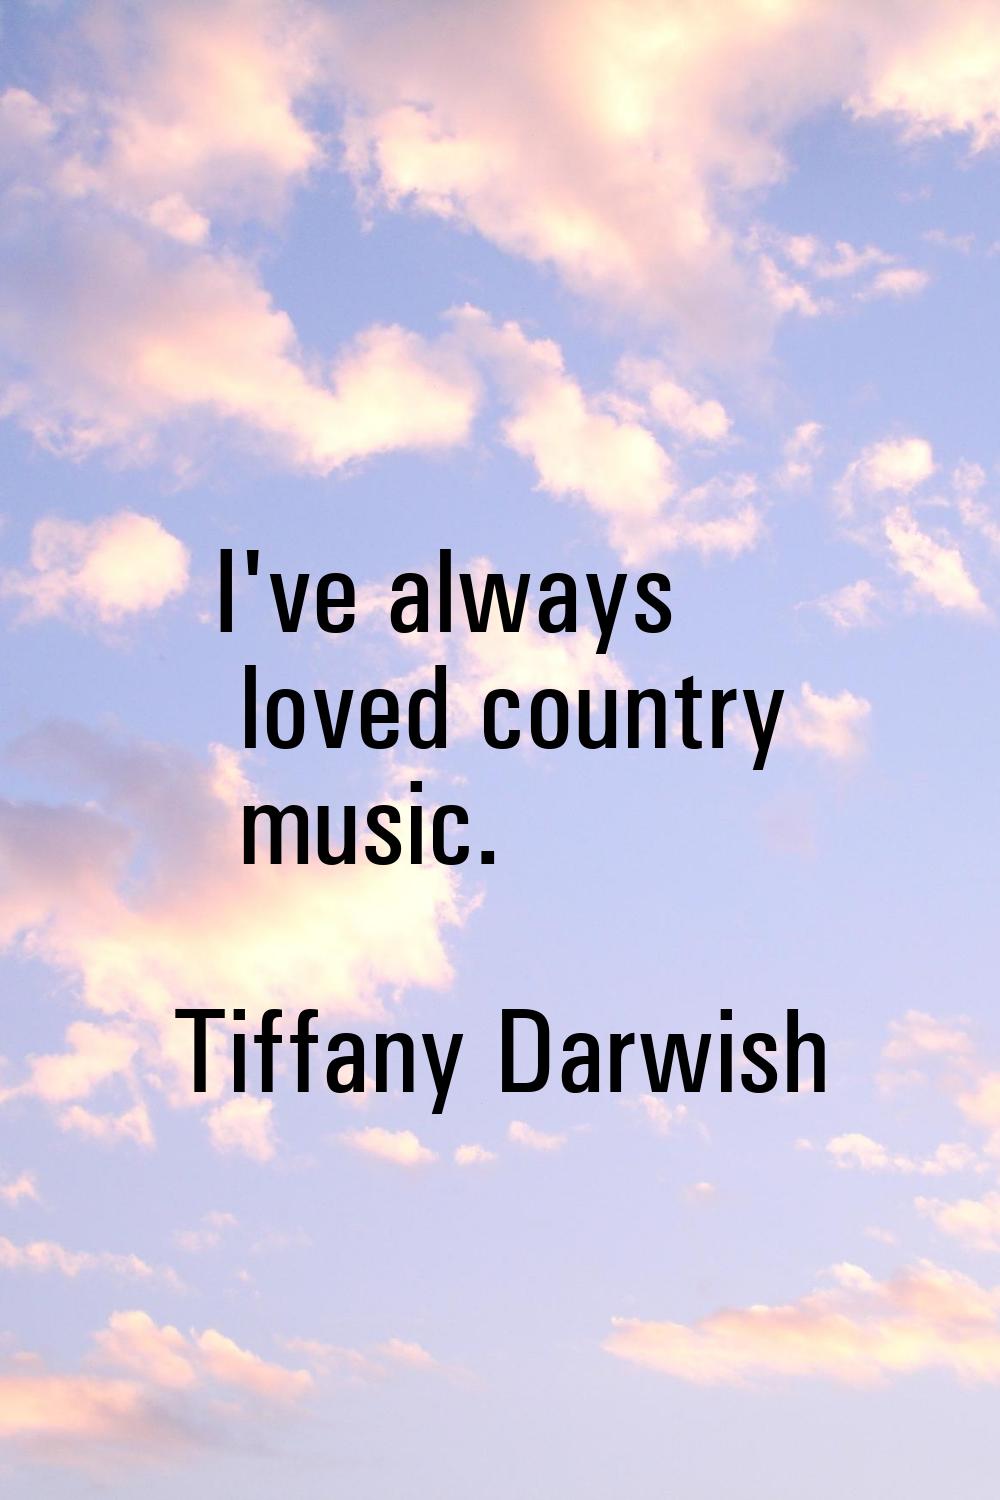 I've always loved country music.